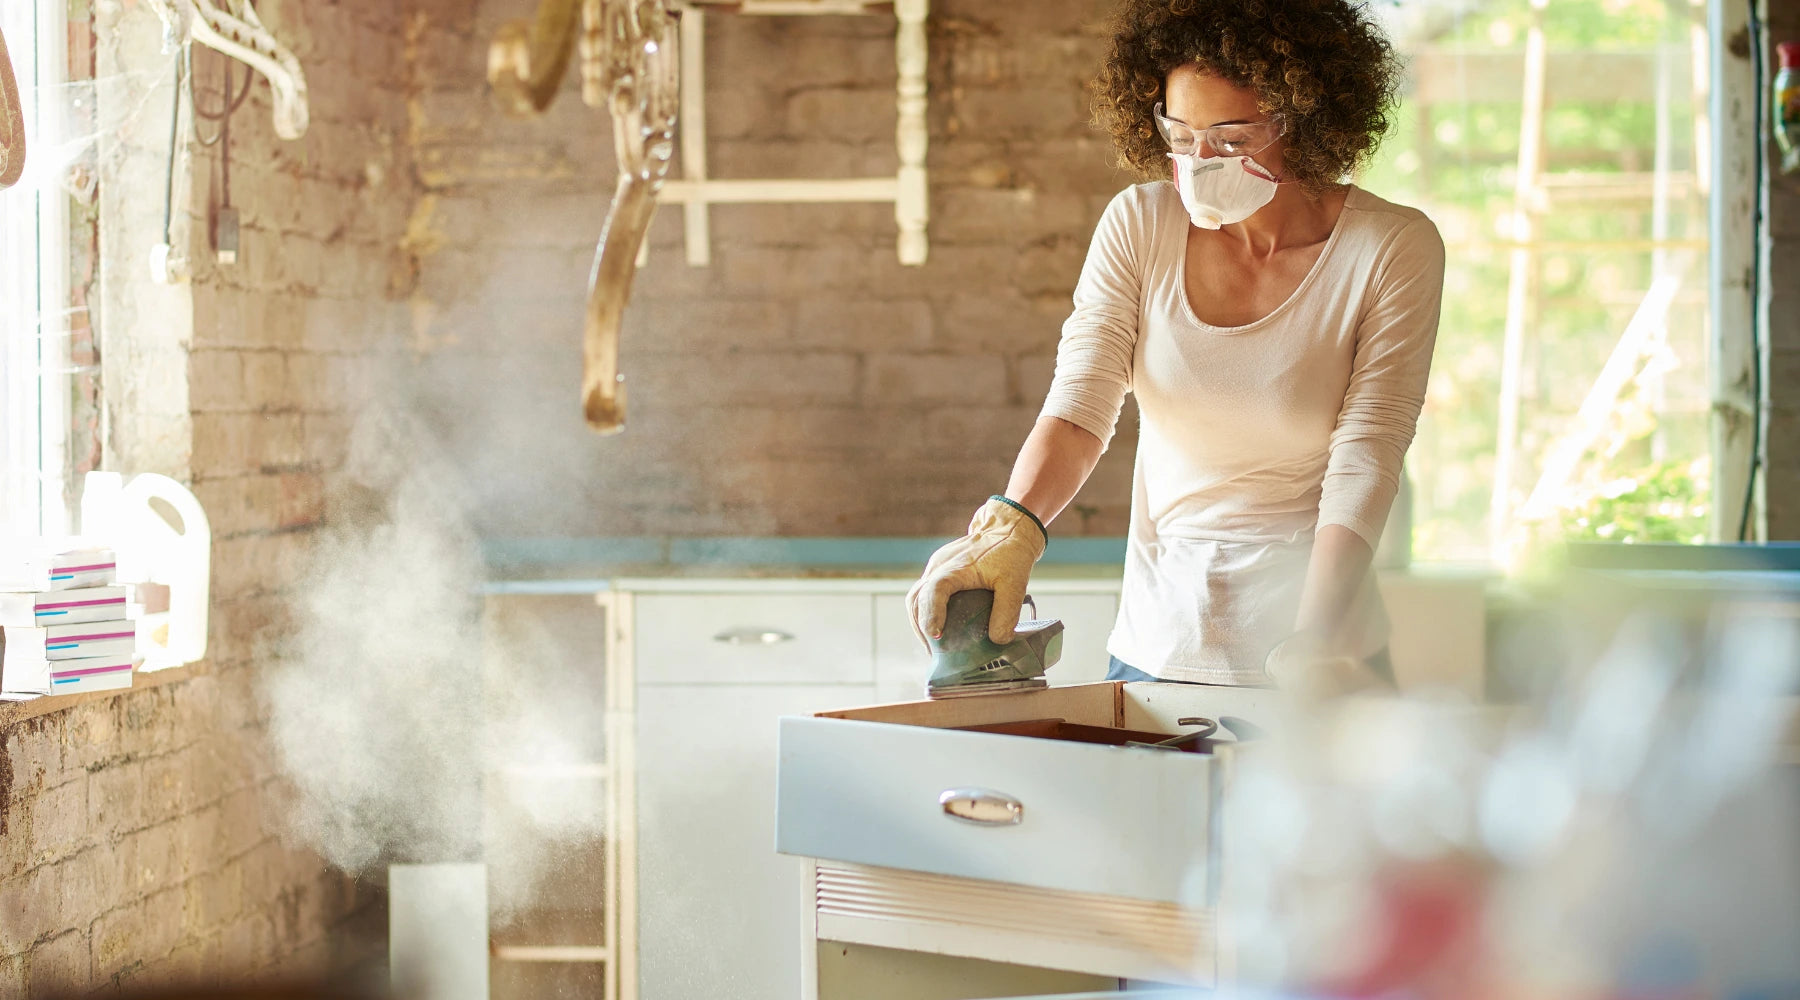 women doing diy sanding old furniture for recycling